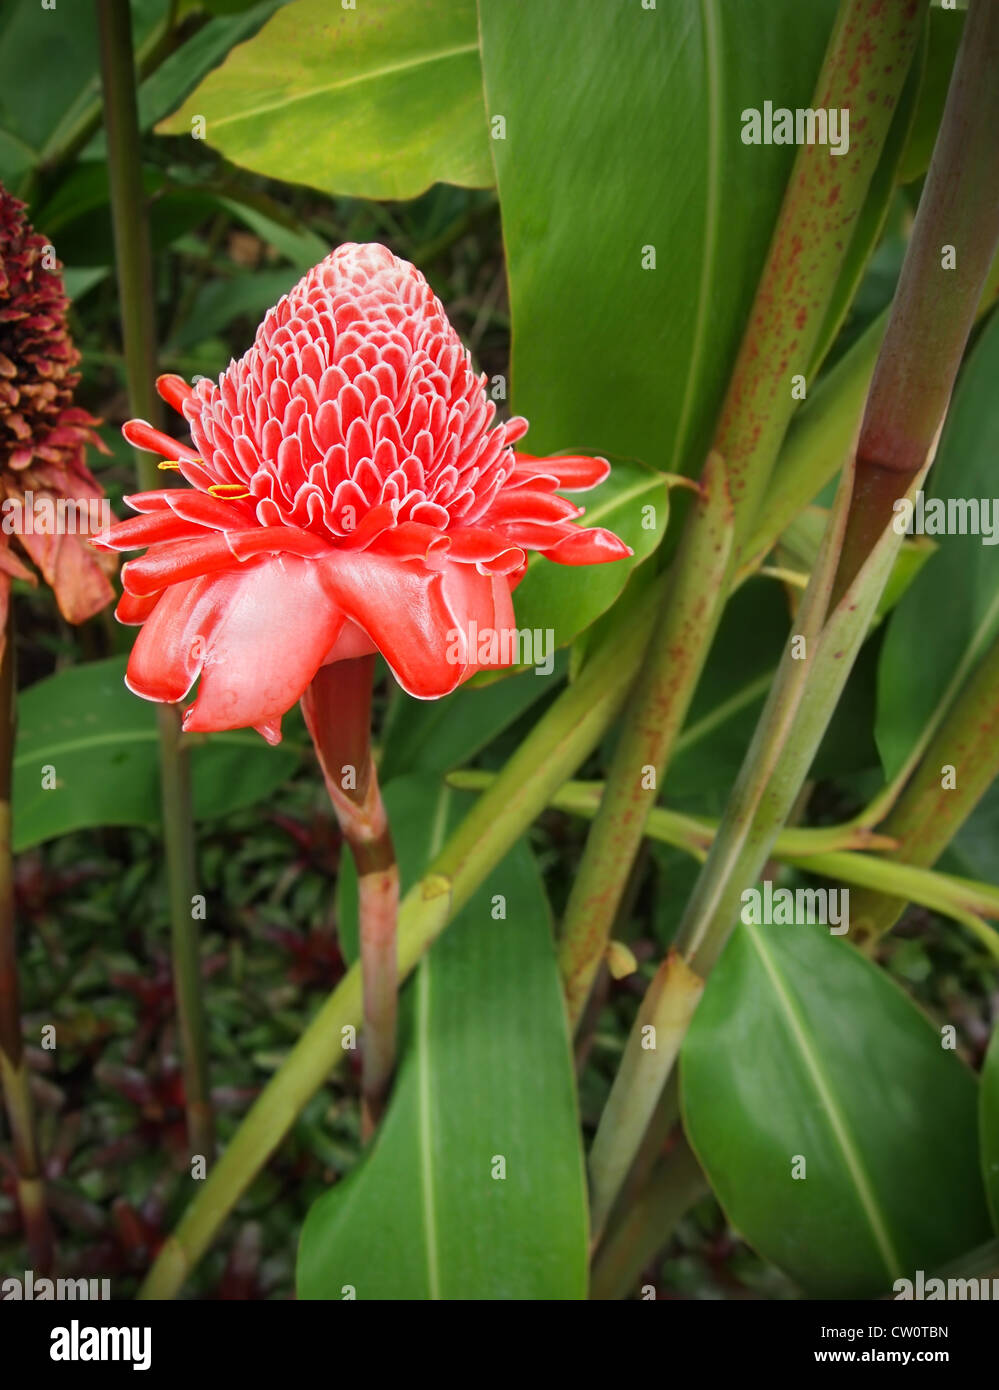 A brilliant pink and white Torch Ginger (Etlingera elatior) blossoms among the tropical foliage. Stock Photo